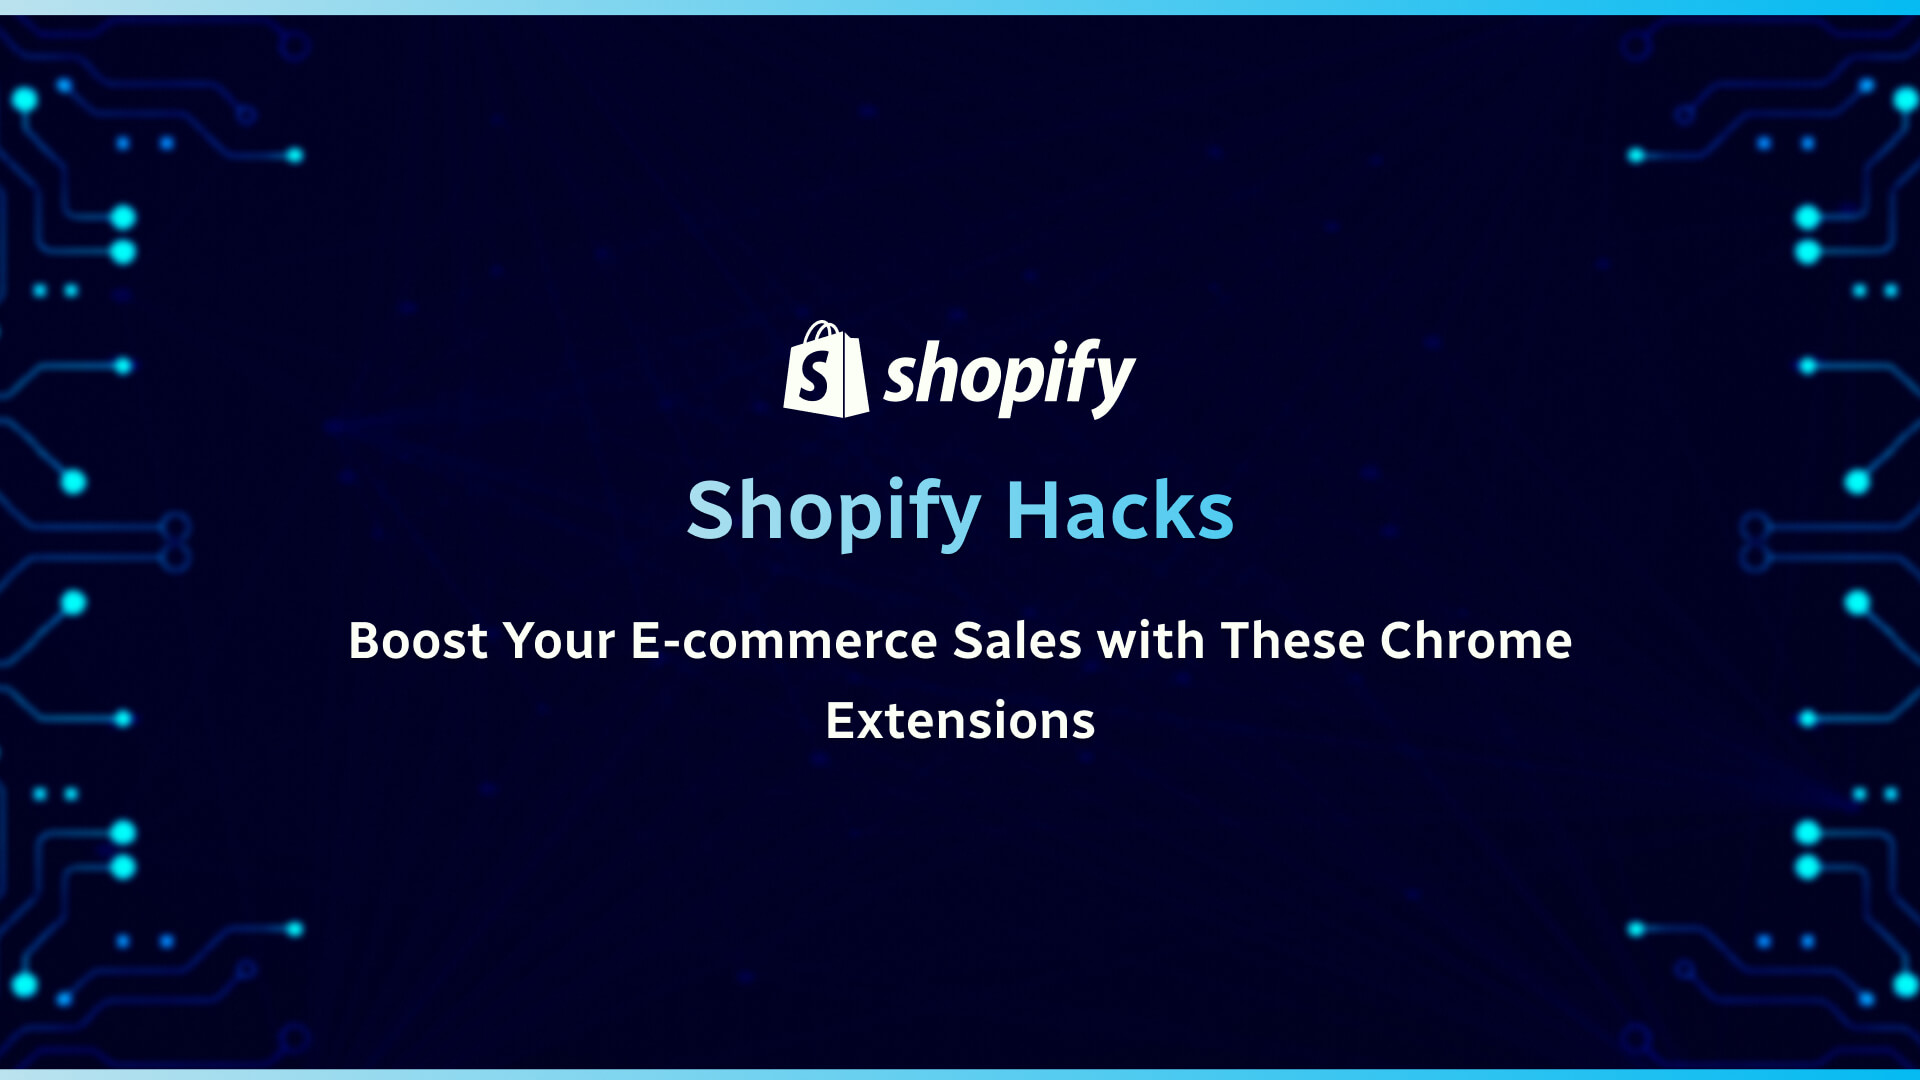 Shopify Hacks_ Boost Your E-commerce Sales with These Chrome Extensions